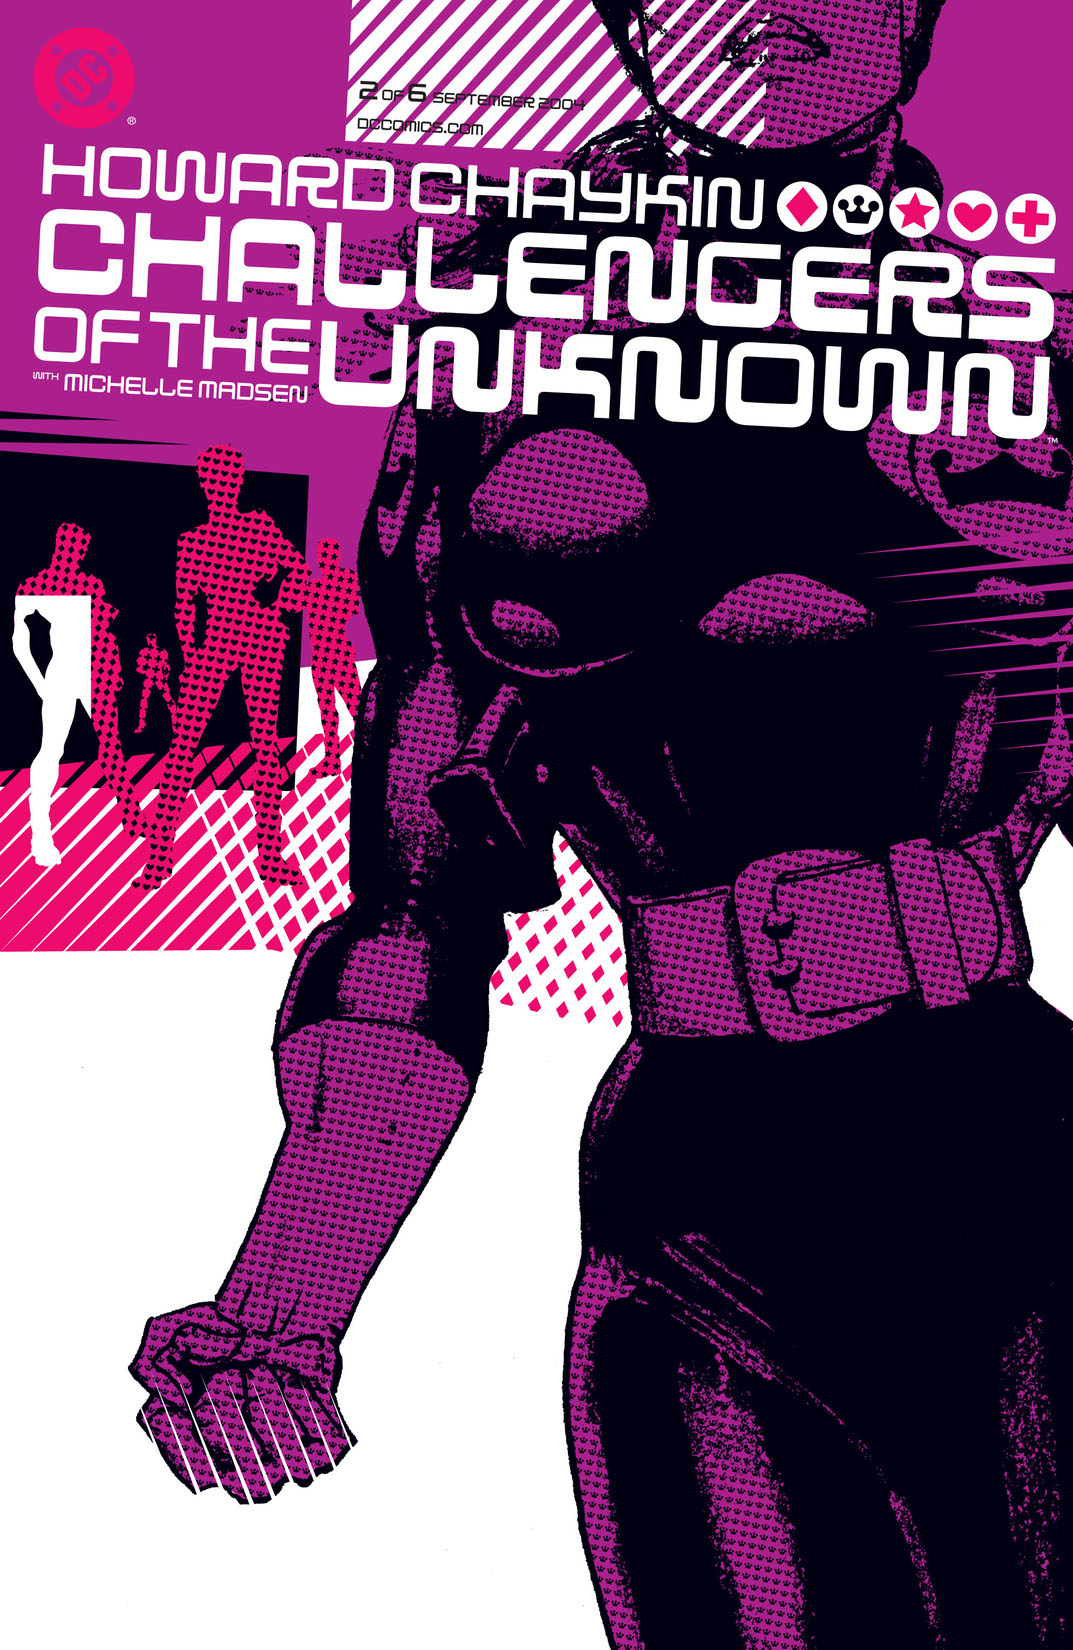 Challengers of the Unknown (2004-) #2 preview images